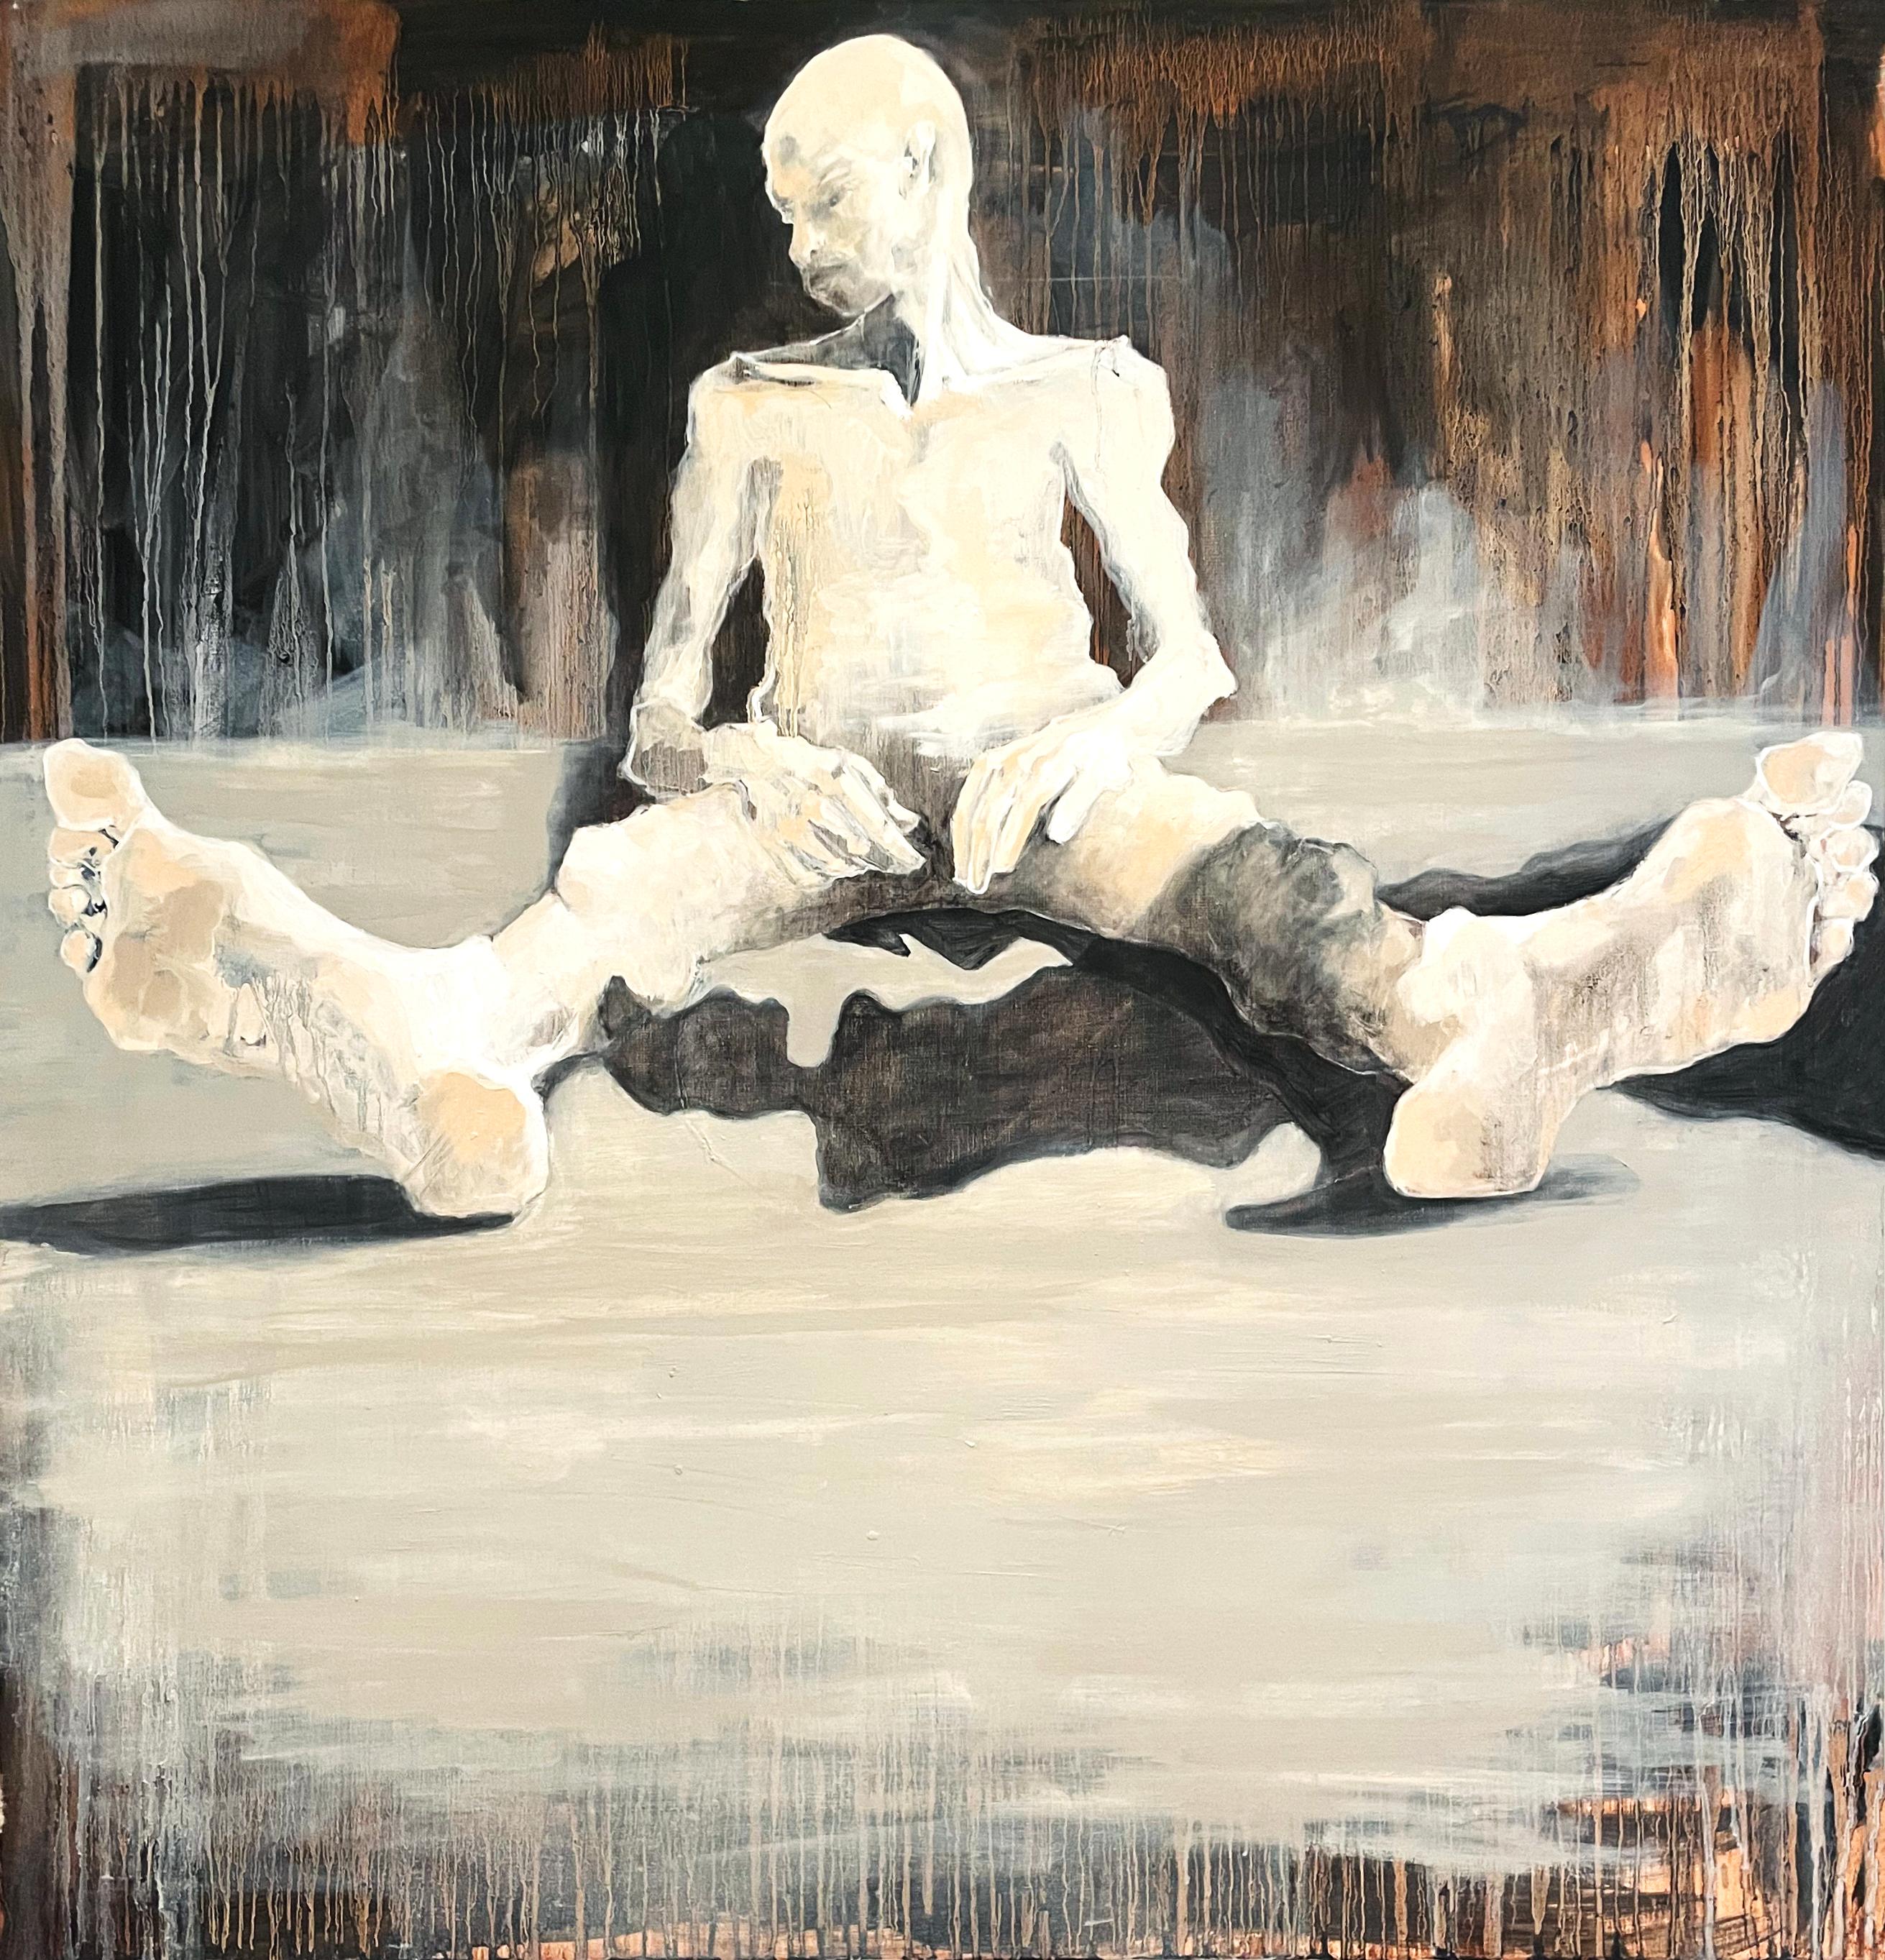 Mel Reese Figurative Painting - "Skidmore Thesis 3", nude figures sitting with legs out, black & brown drips